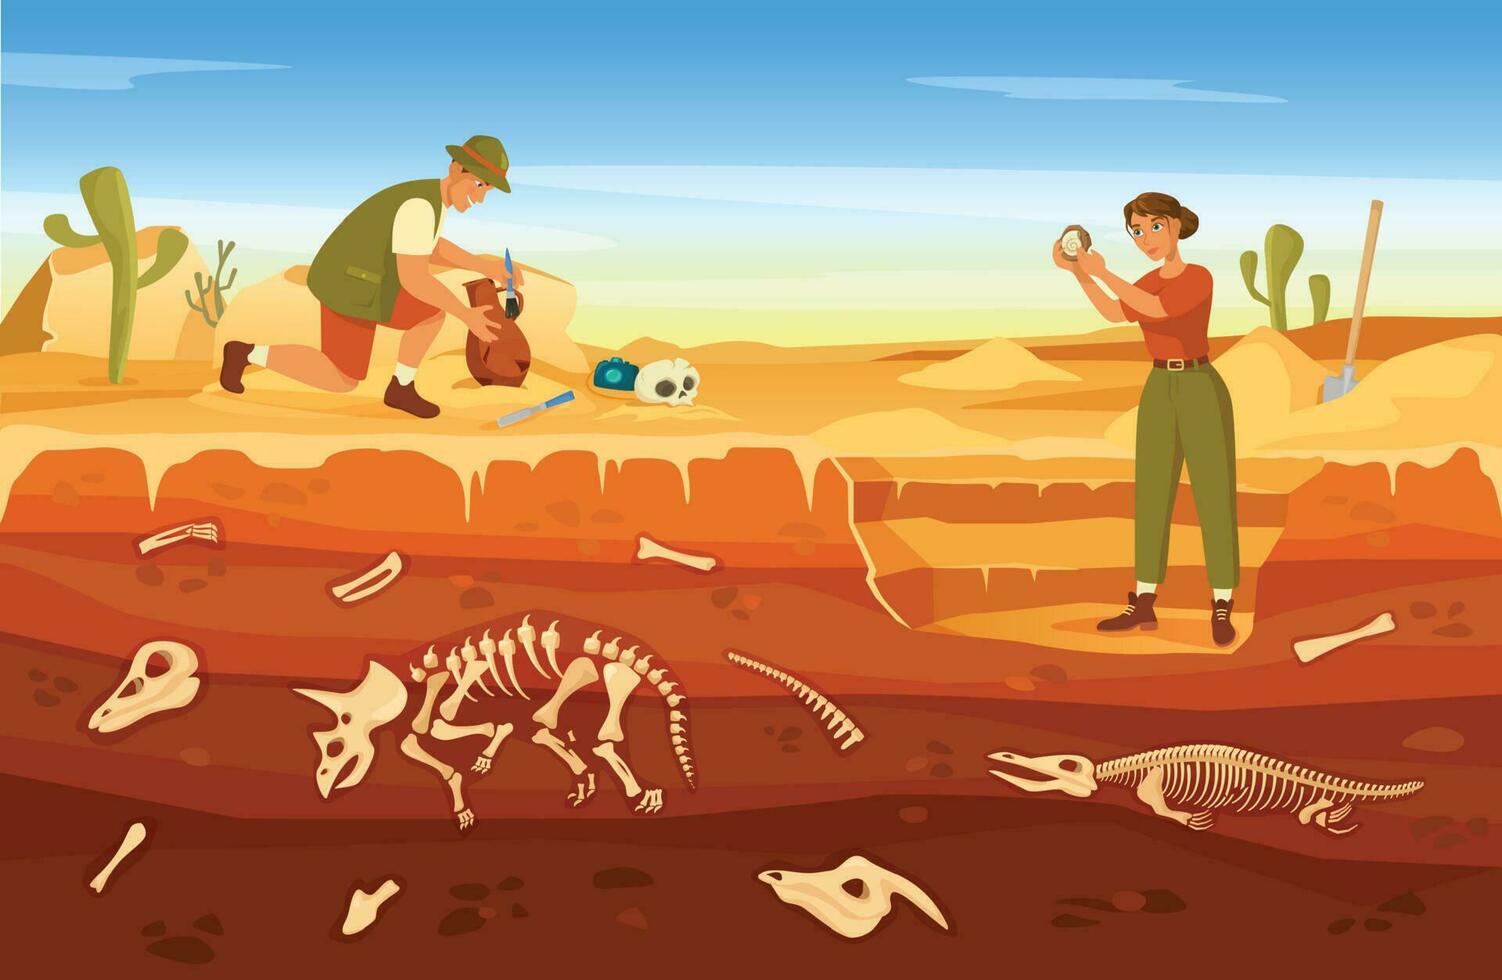 Cartoon archaeological excavation, archaeologists discovering ancient artifacts. Paleontologist finding fossils at dig site vector illustration